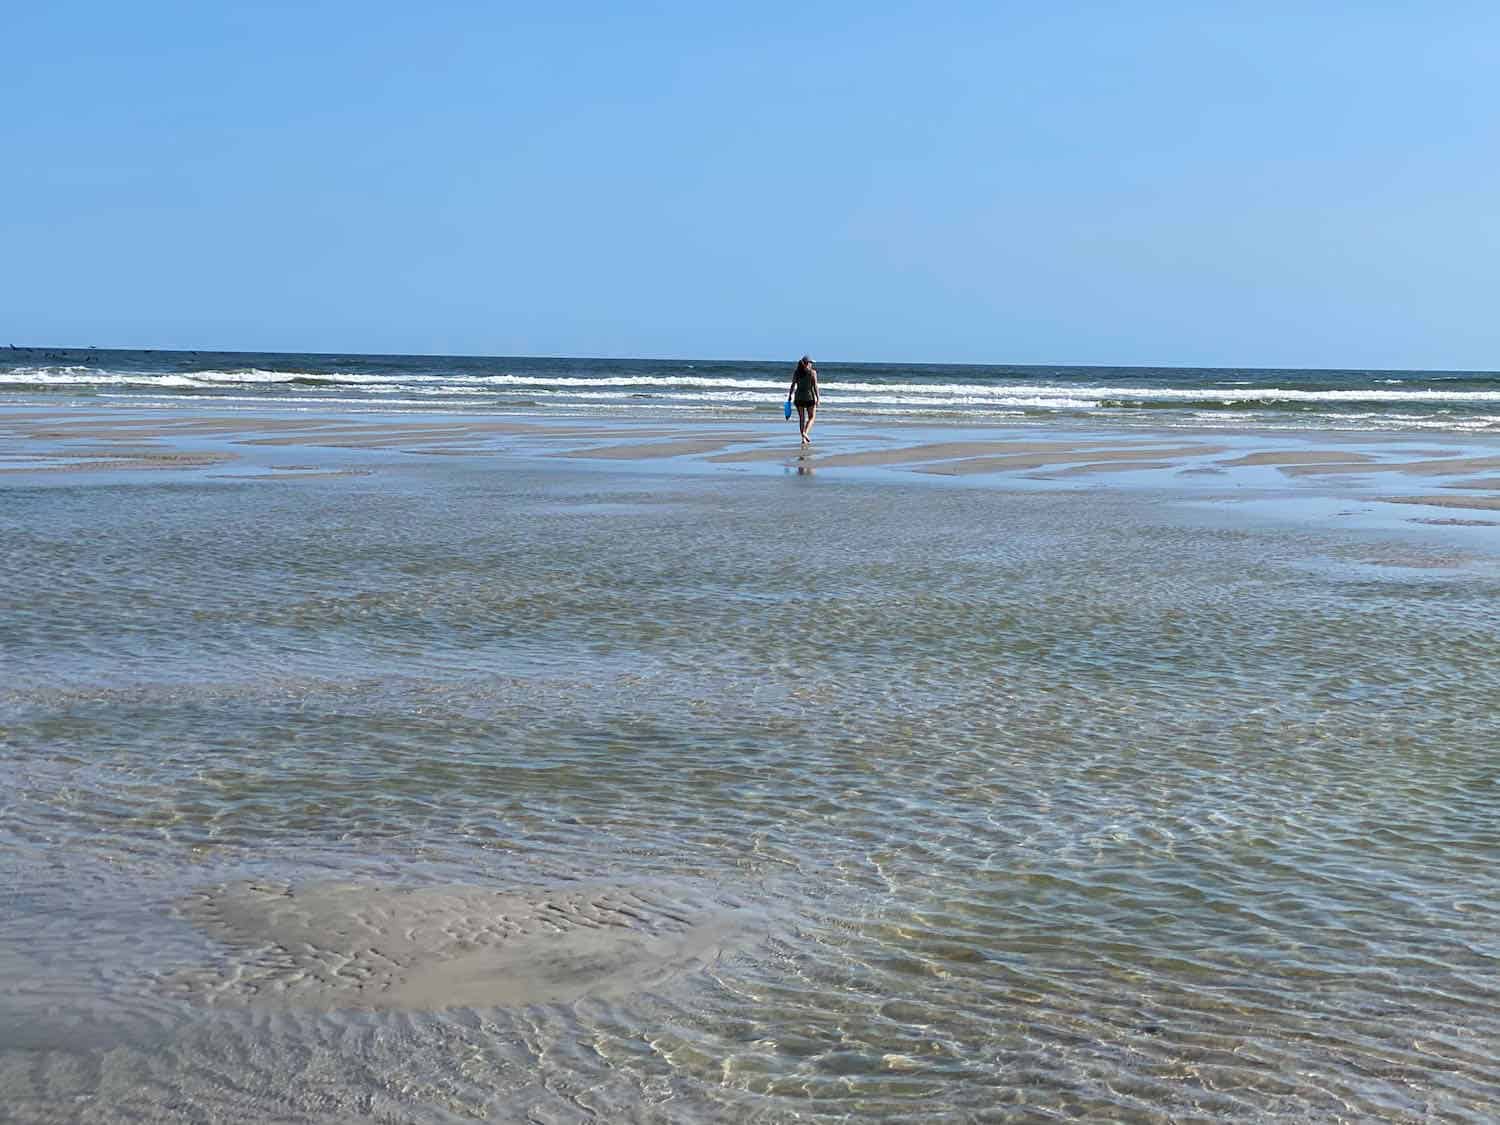 One person walking on an empty beach